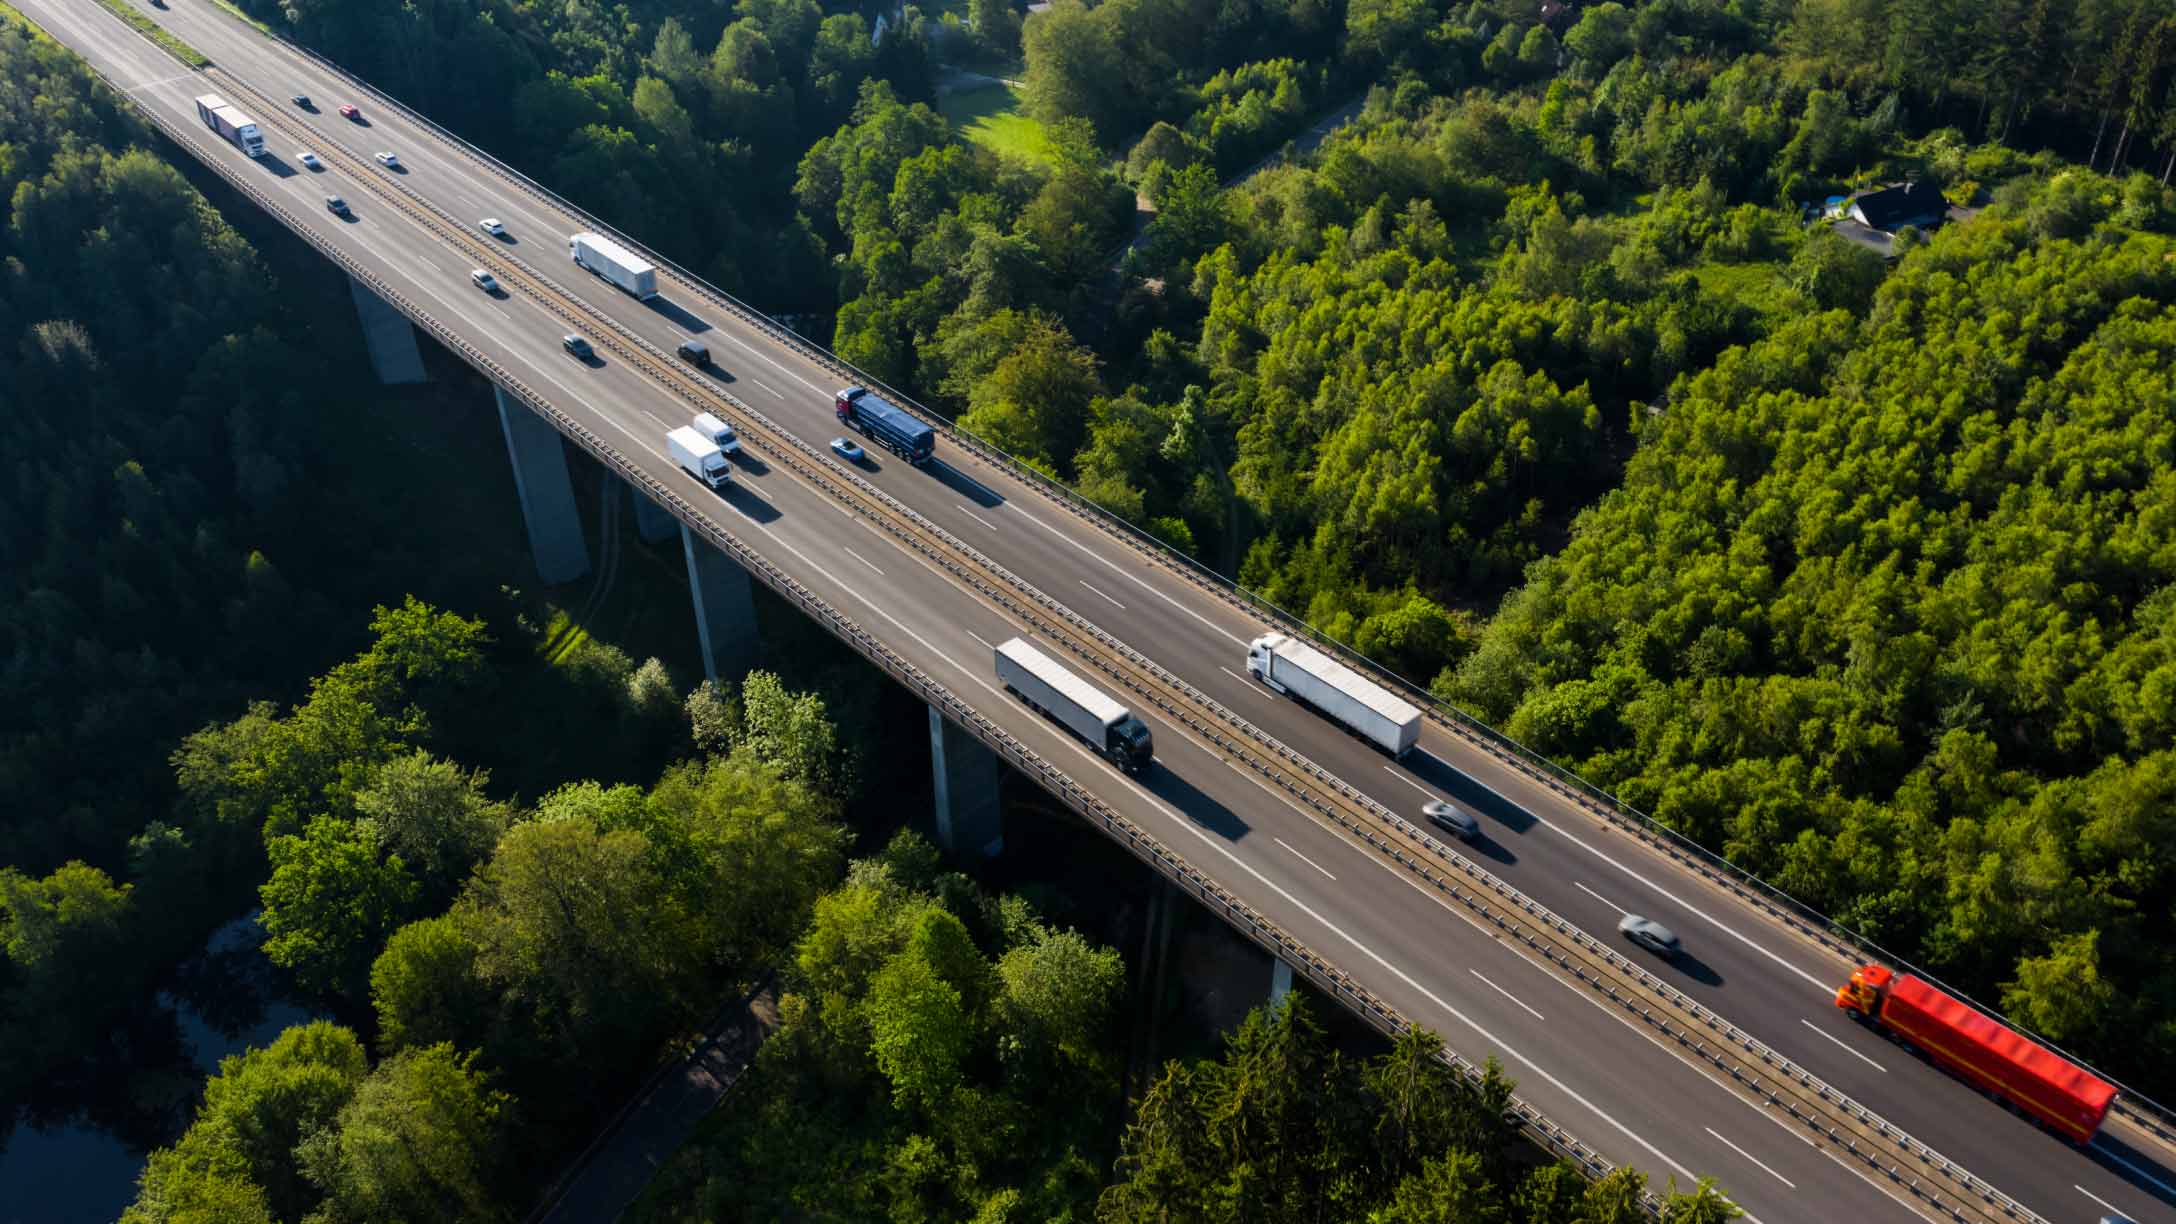 drone view of a highway with trees on each side